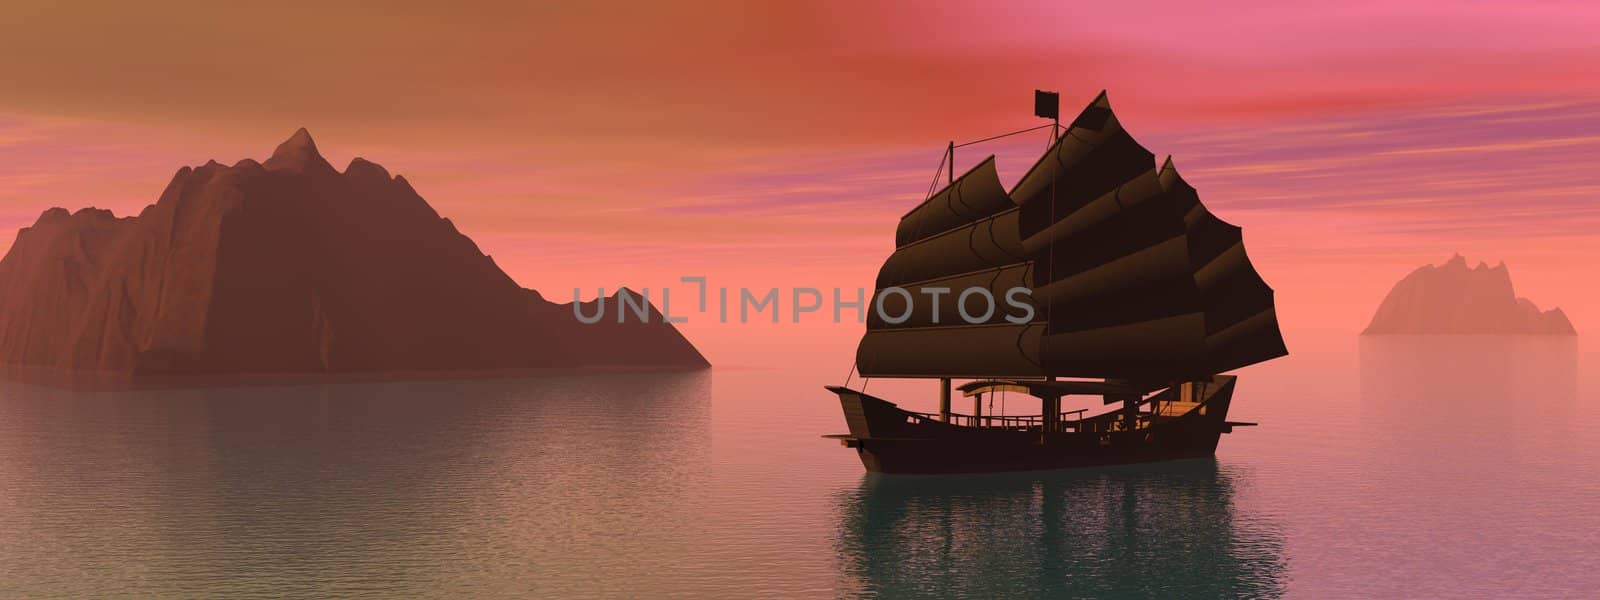 Silouhette of oriental junk boat on water next to mountains by sunset